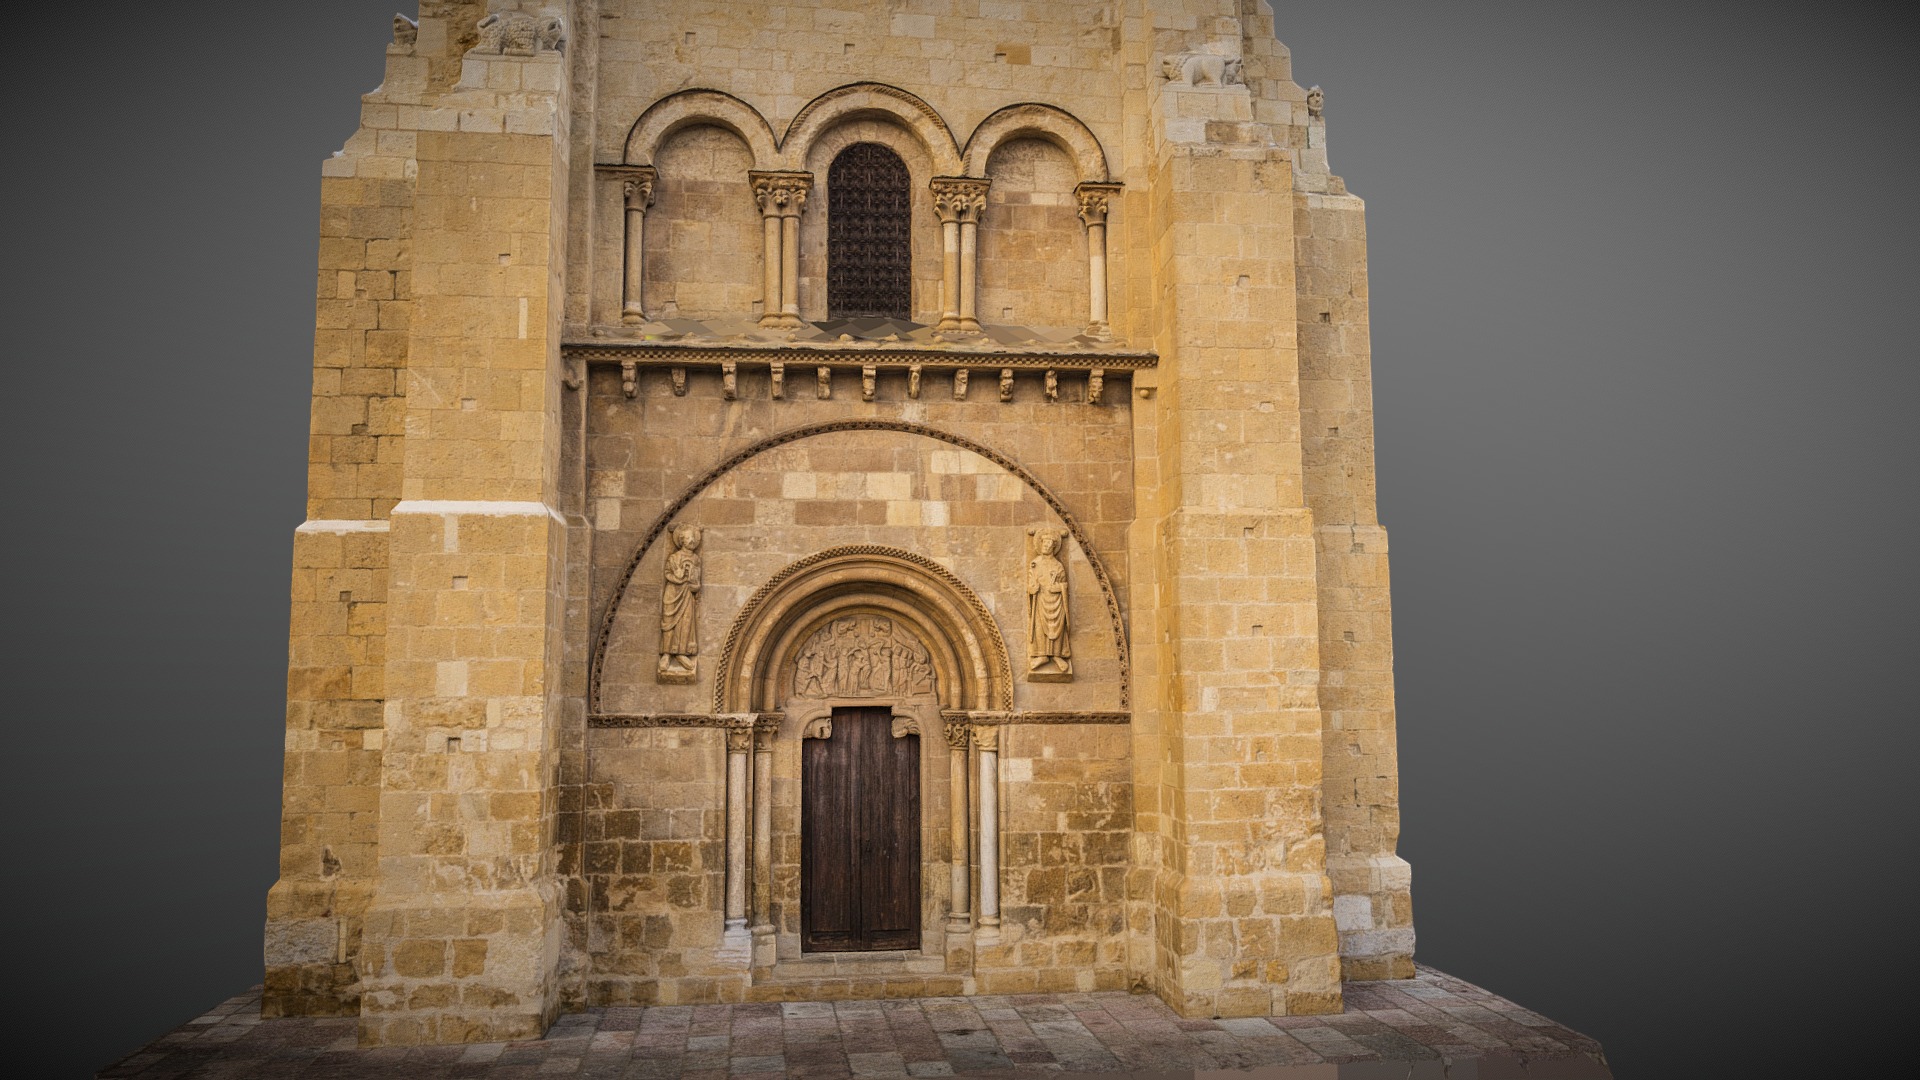 3D model Puerta del Perdón – photogrammetry scan - This is a 3D model of the Puerta del Perdón - photogrammetry scan. The 3D model is about a stone building with a large arched doorway.